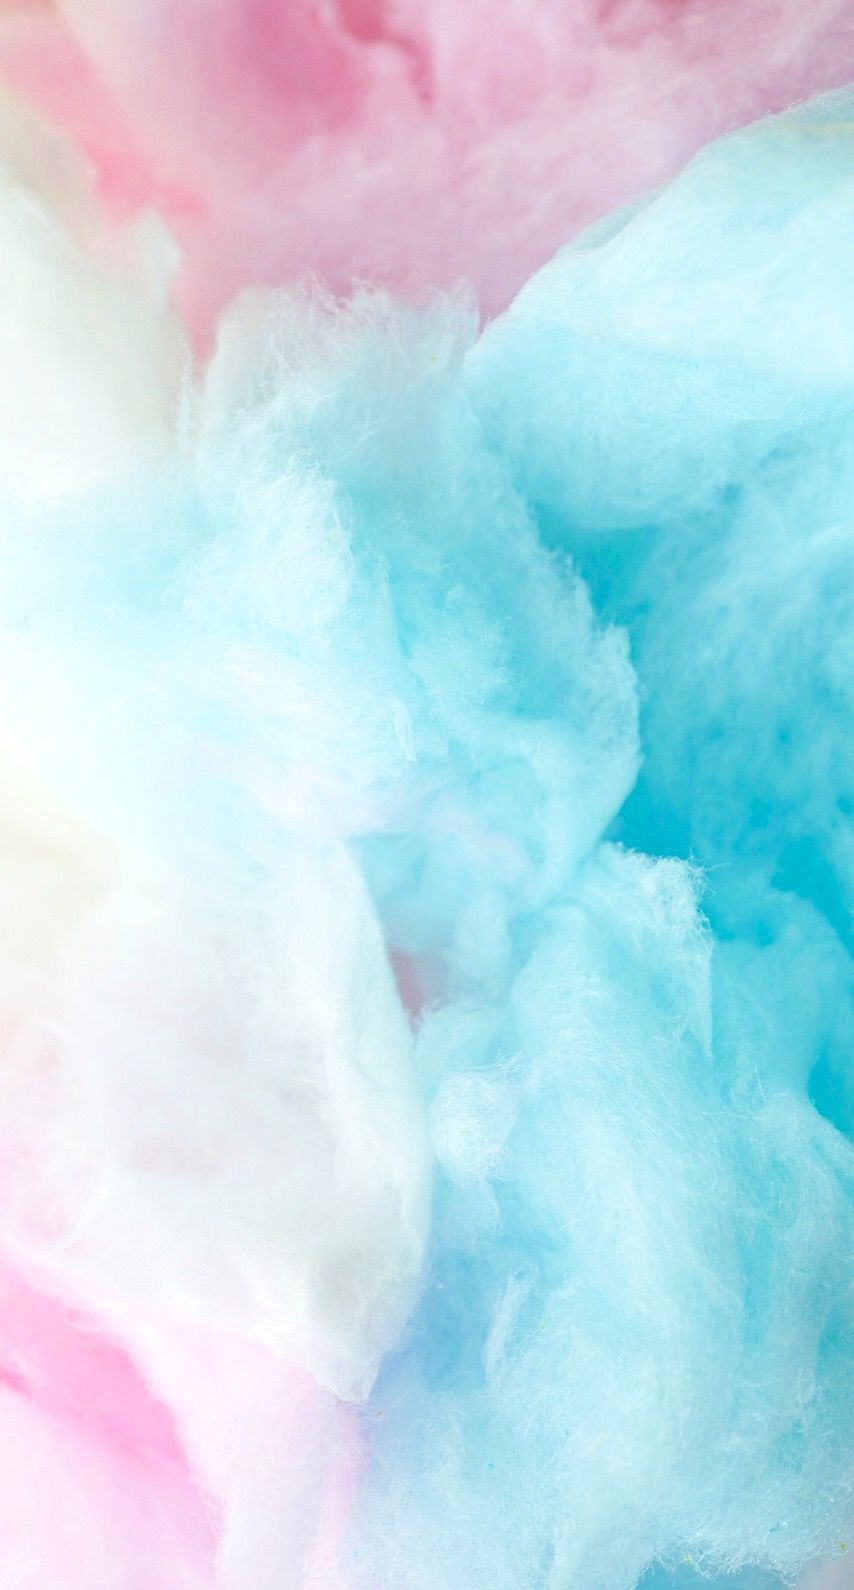 pastel iphone wallpaper tumblr,cotton candy,blue,sky,pink,turquoise